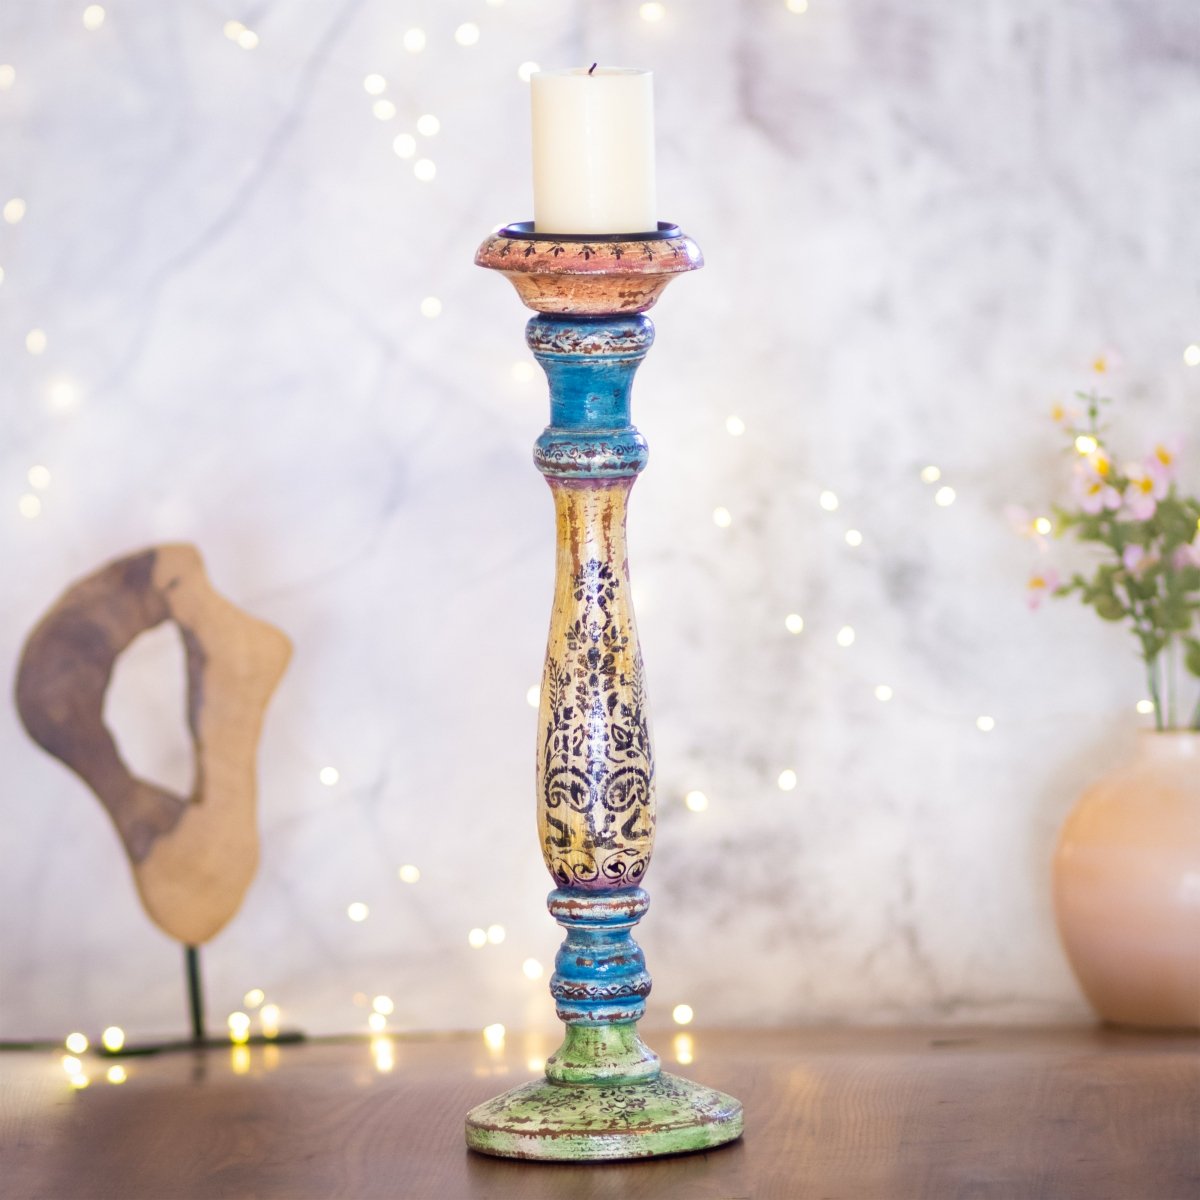 Kezevel Wooden Candle Stand - Antique Distressed Handcrafted Ivory Blue Green Candle Holders Home Decor, Pillar Candle Holder